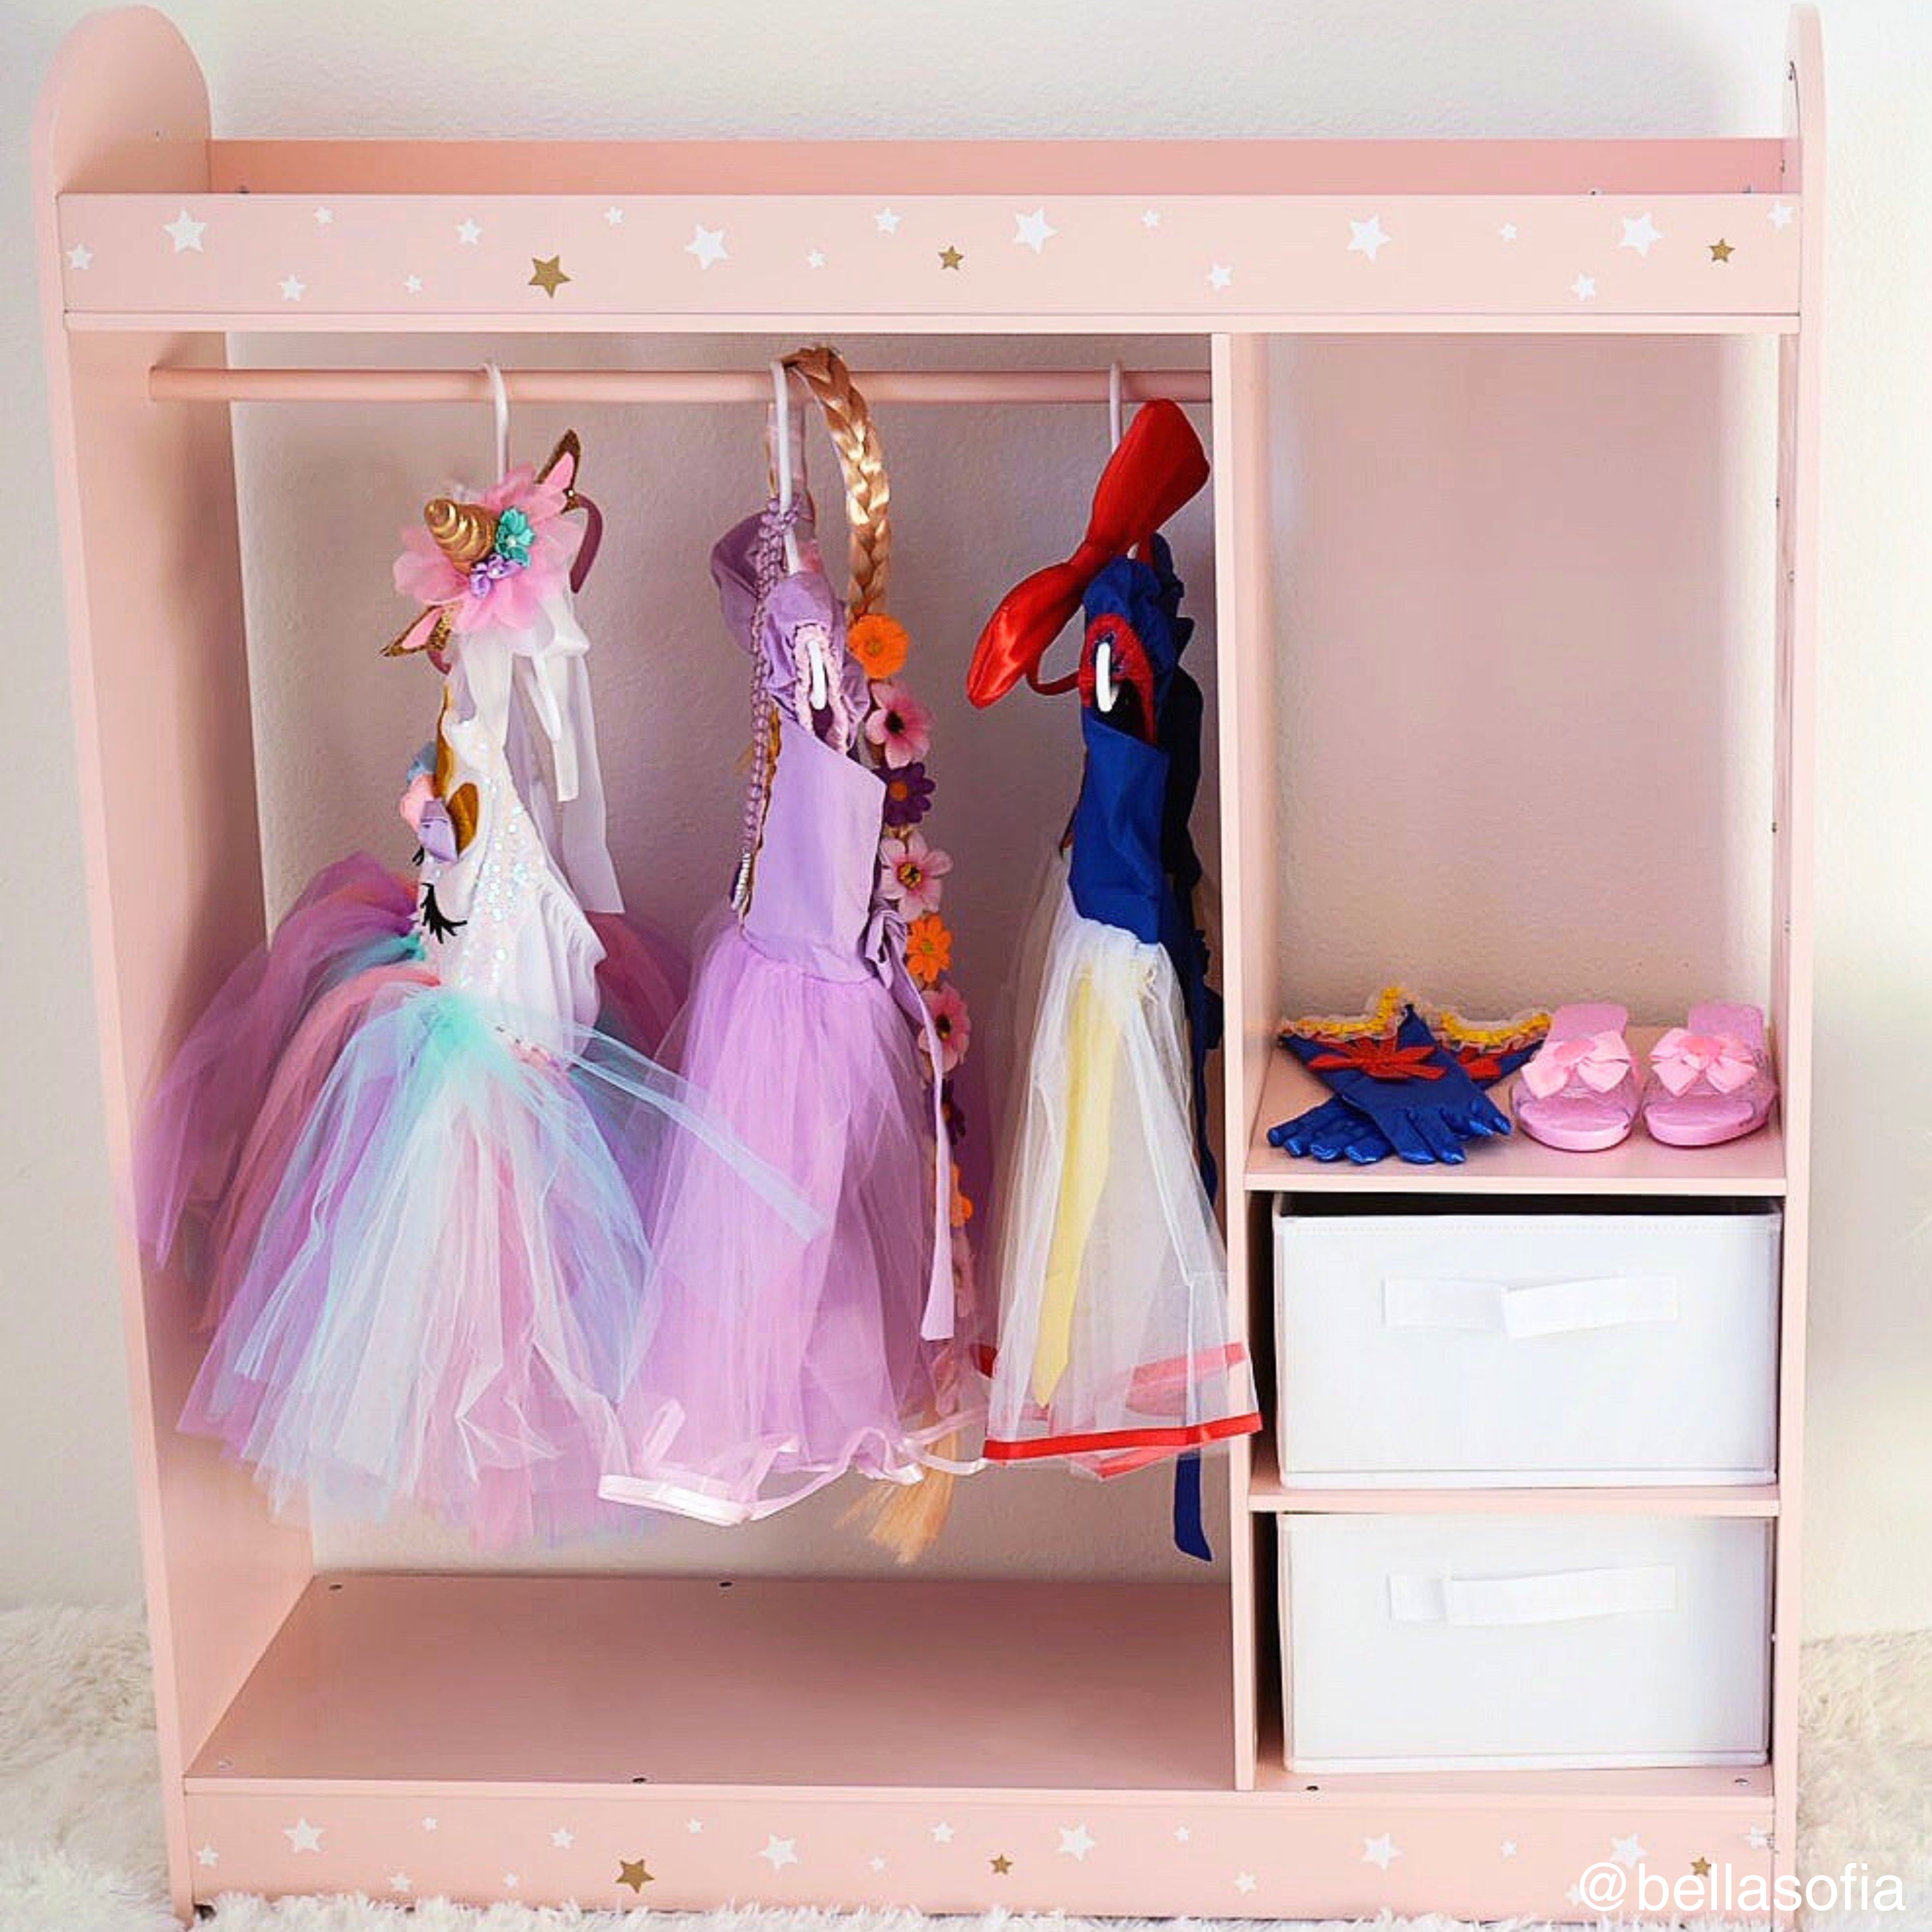 a pink dressing rack sized for little ones features a star print, plus organization